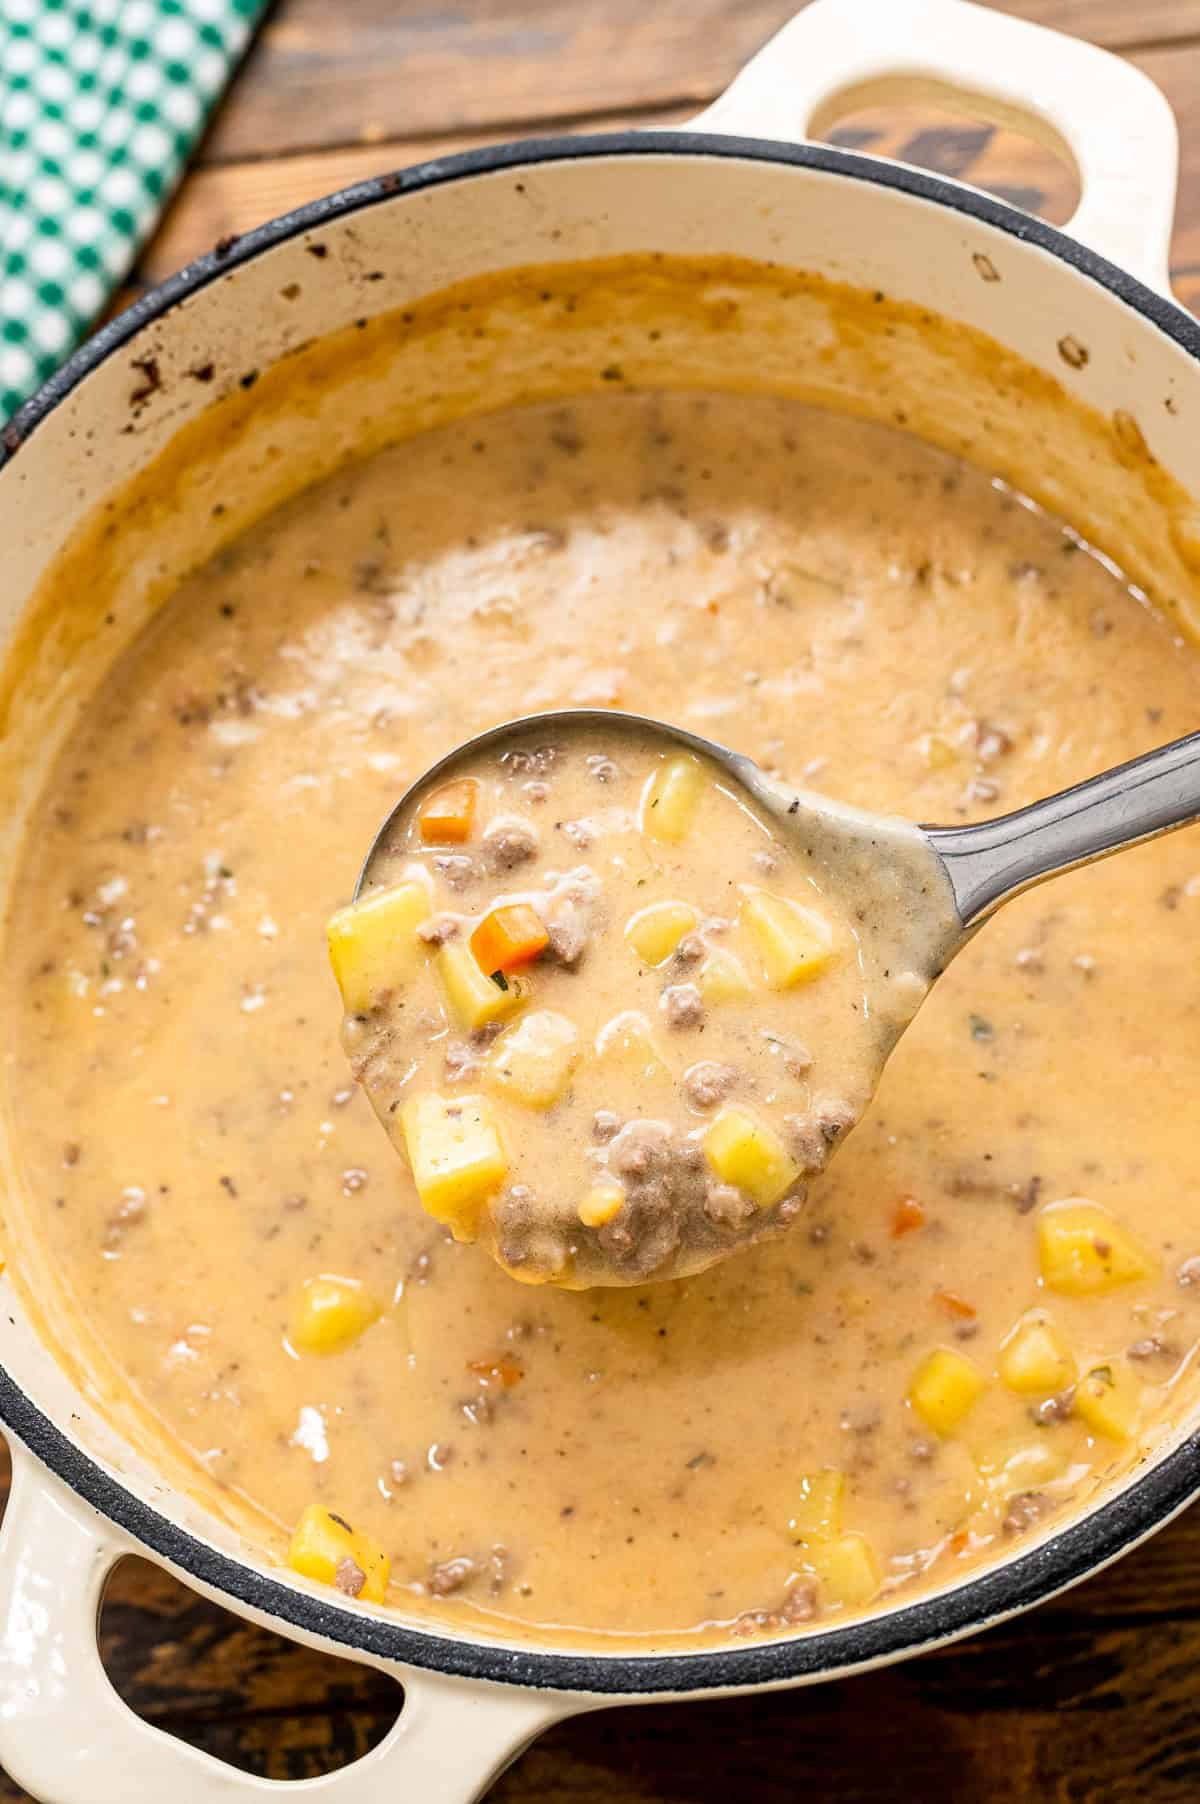 Ladle scooping Cheeseburger Soup out of pot